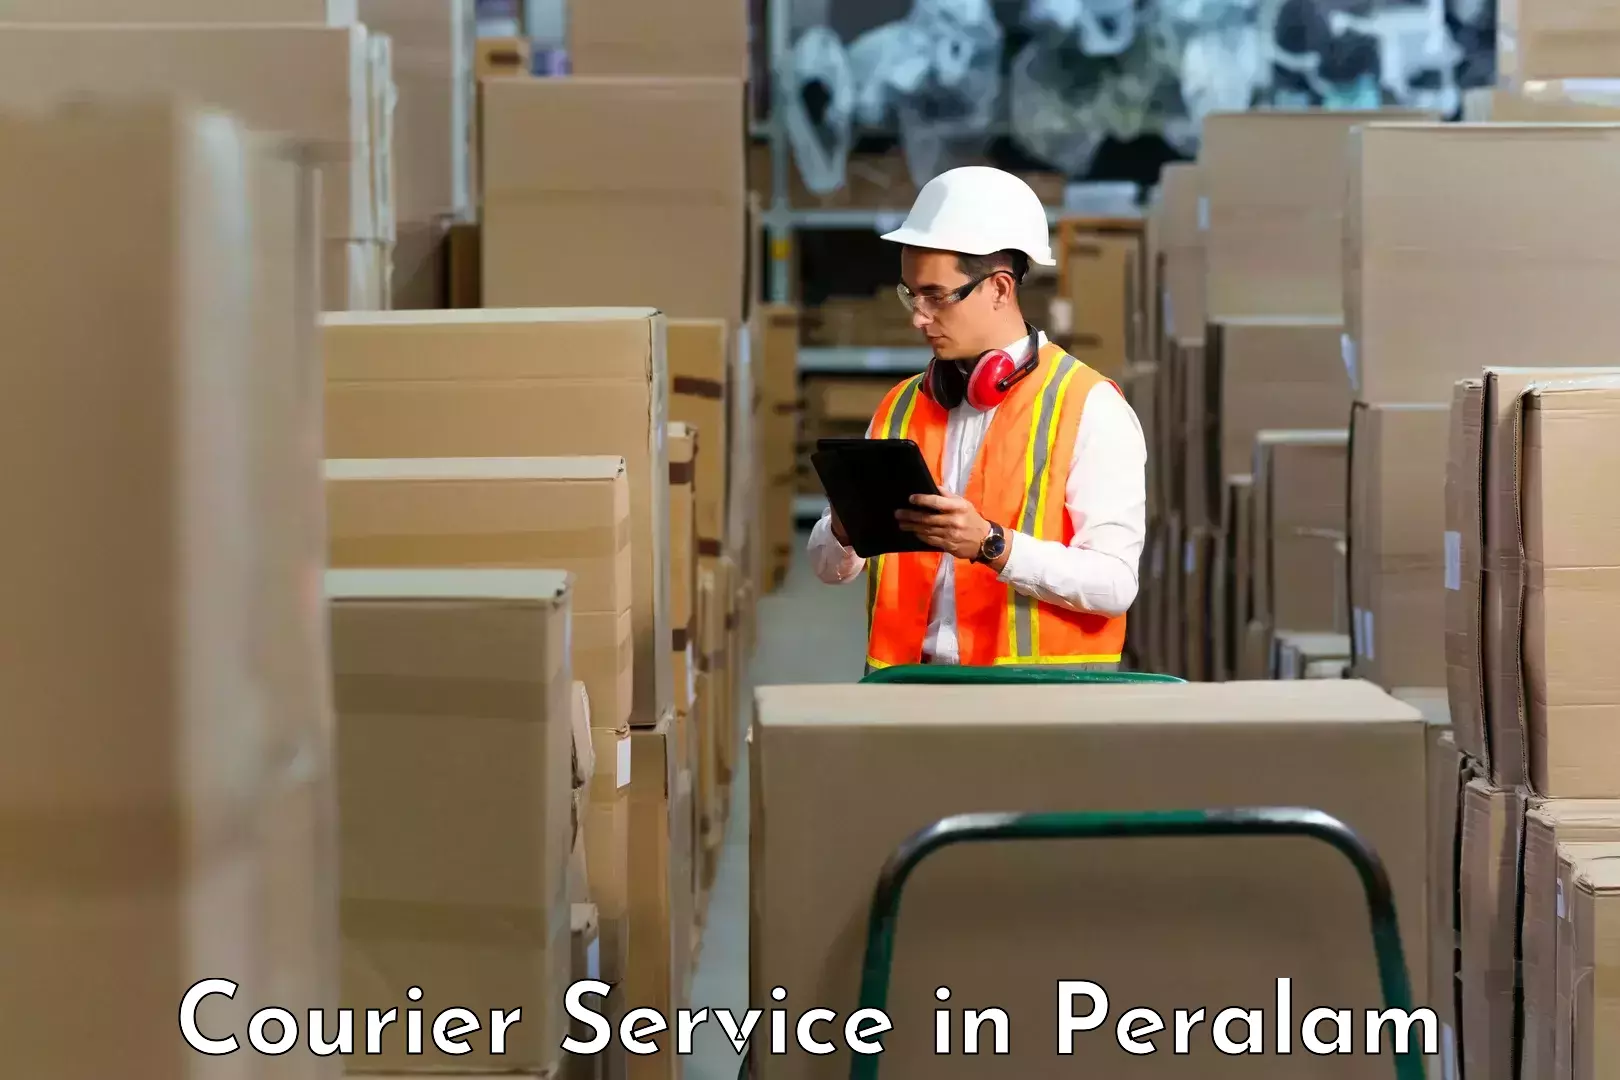 Customer-centric shipping in Peralam